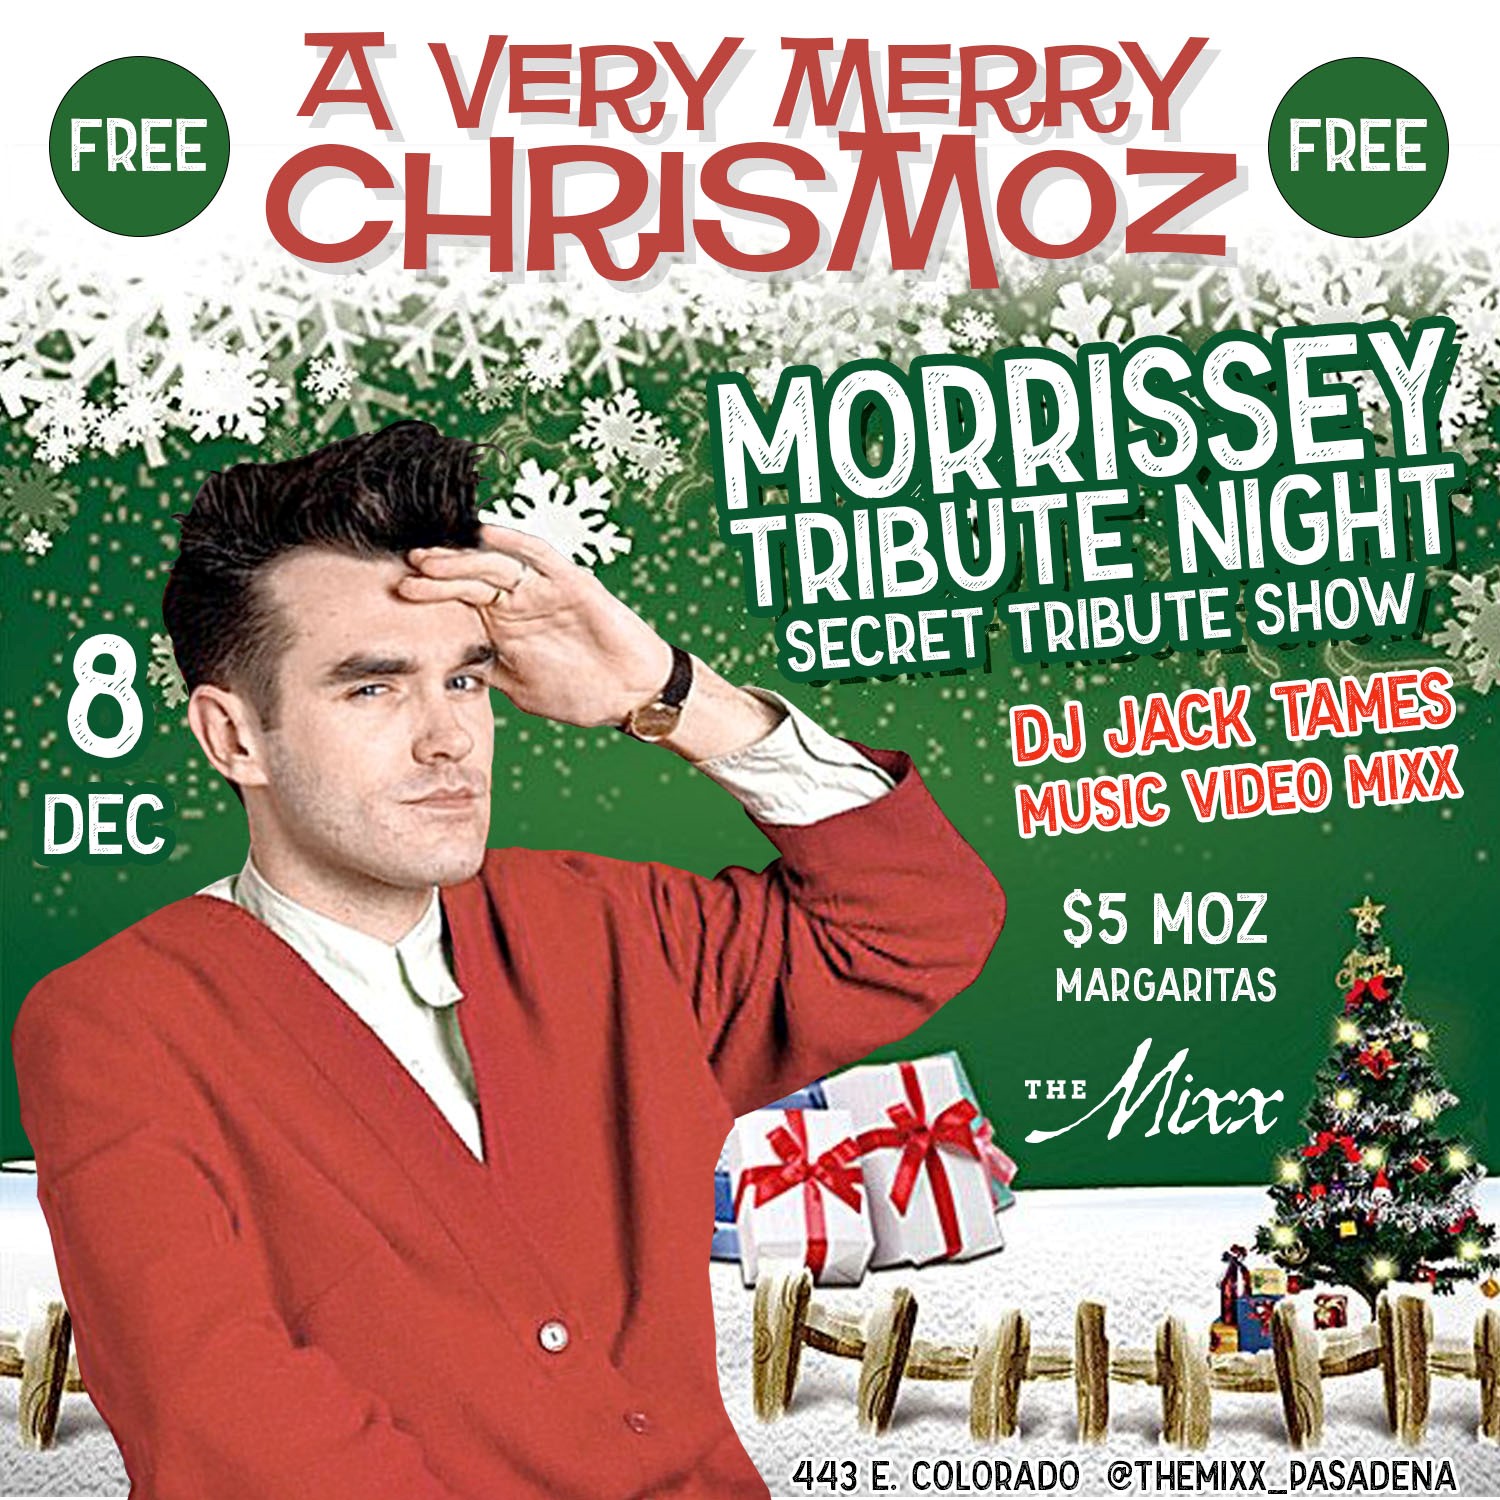 You are currently viewing A Very Merry ChristMOZ Smiths and Morrisey Holiday Tribute